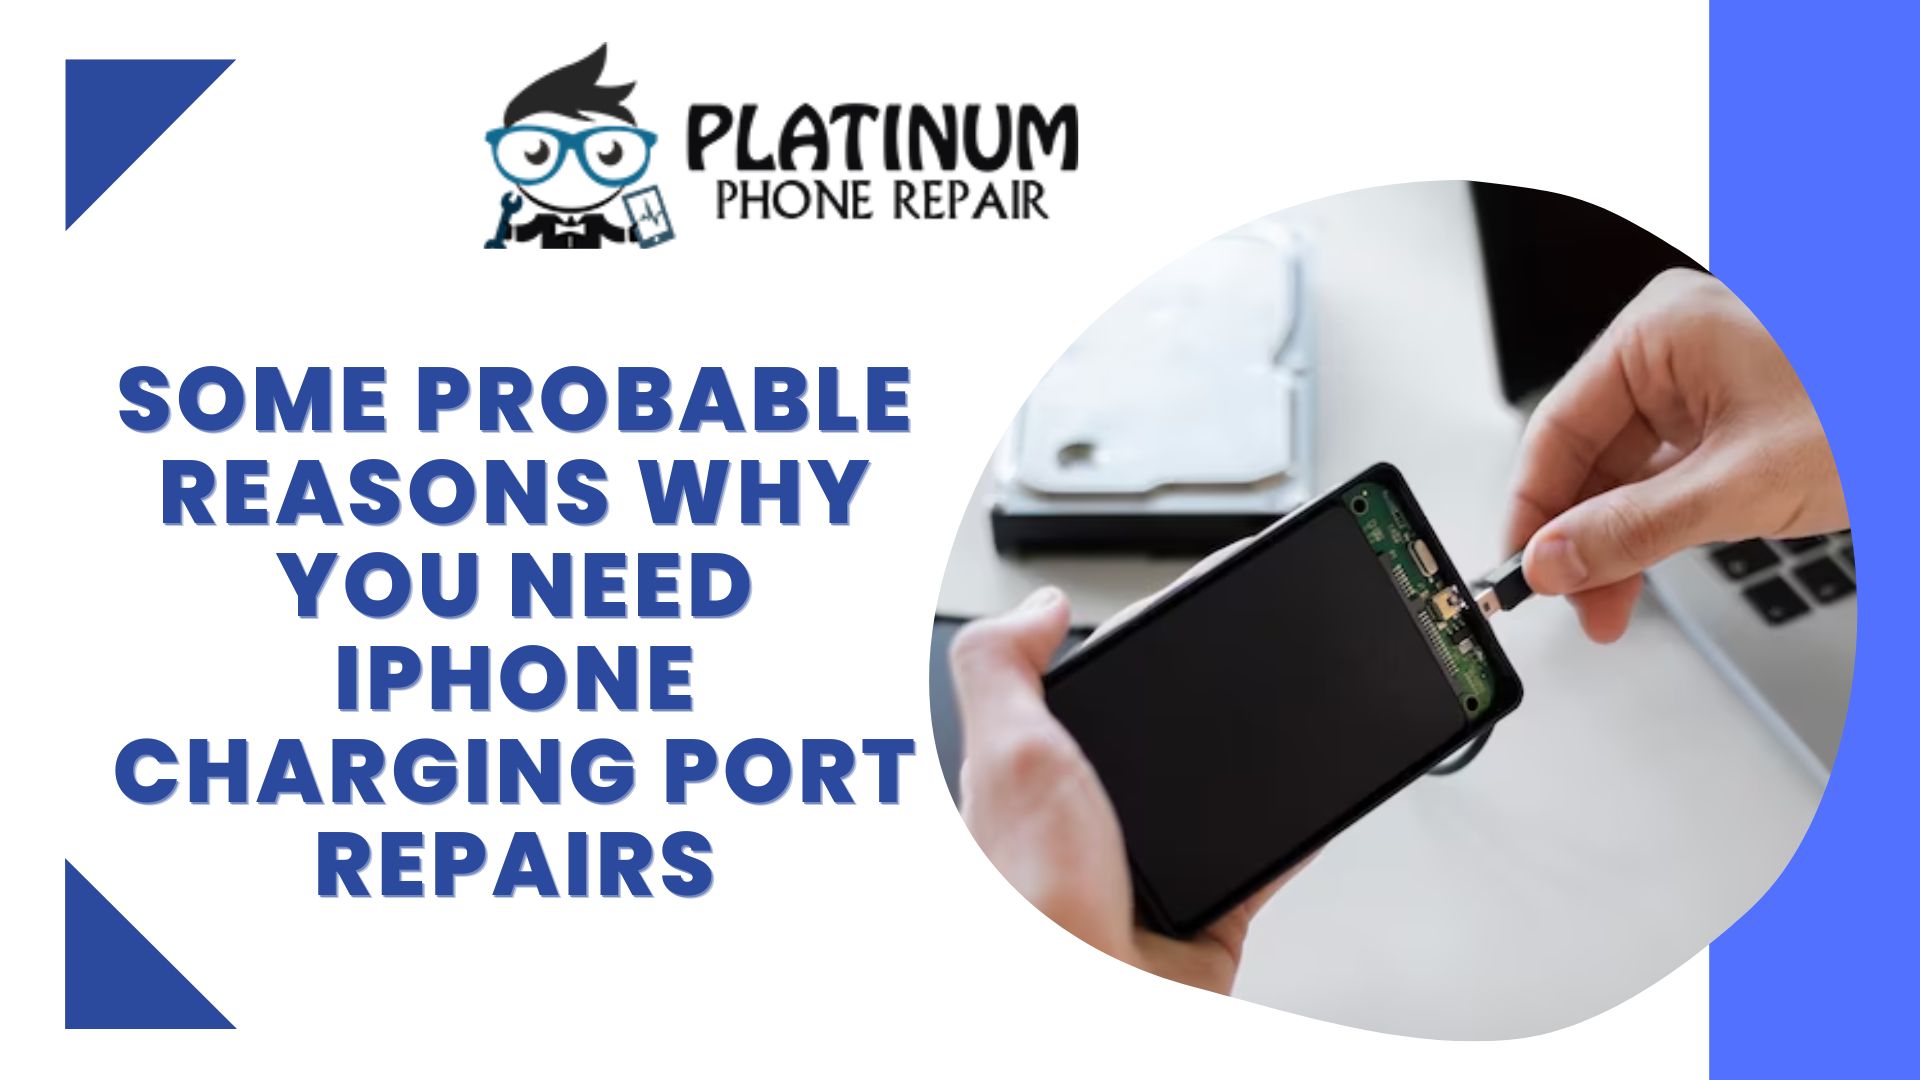 Some Probable Reasons Why You Need iPhone Charging Port Repairs